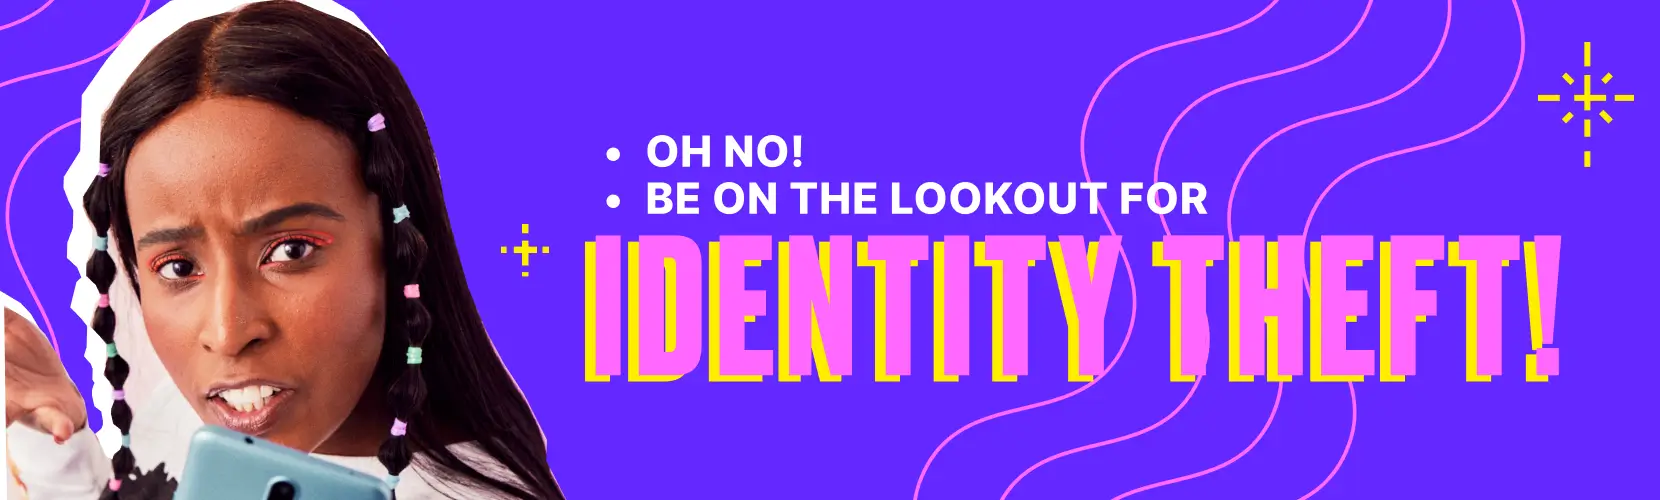 Identity Theft: Don't Let Scammers Catch You Out!